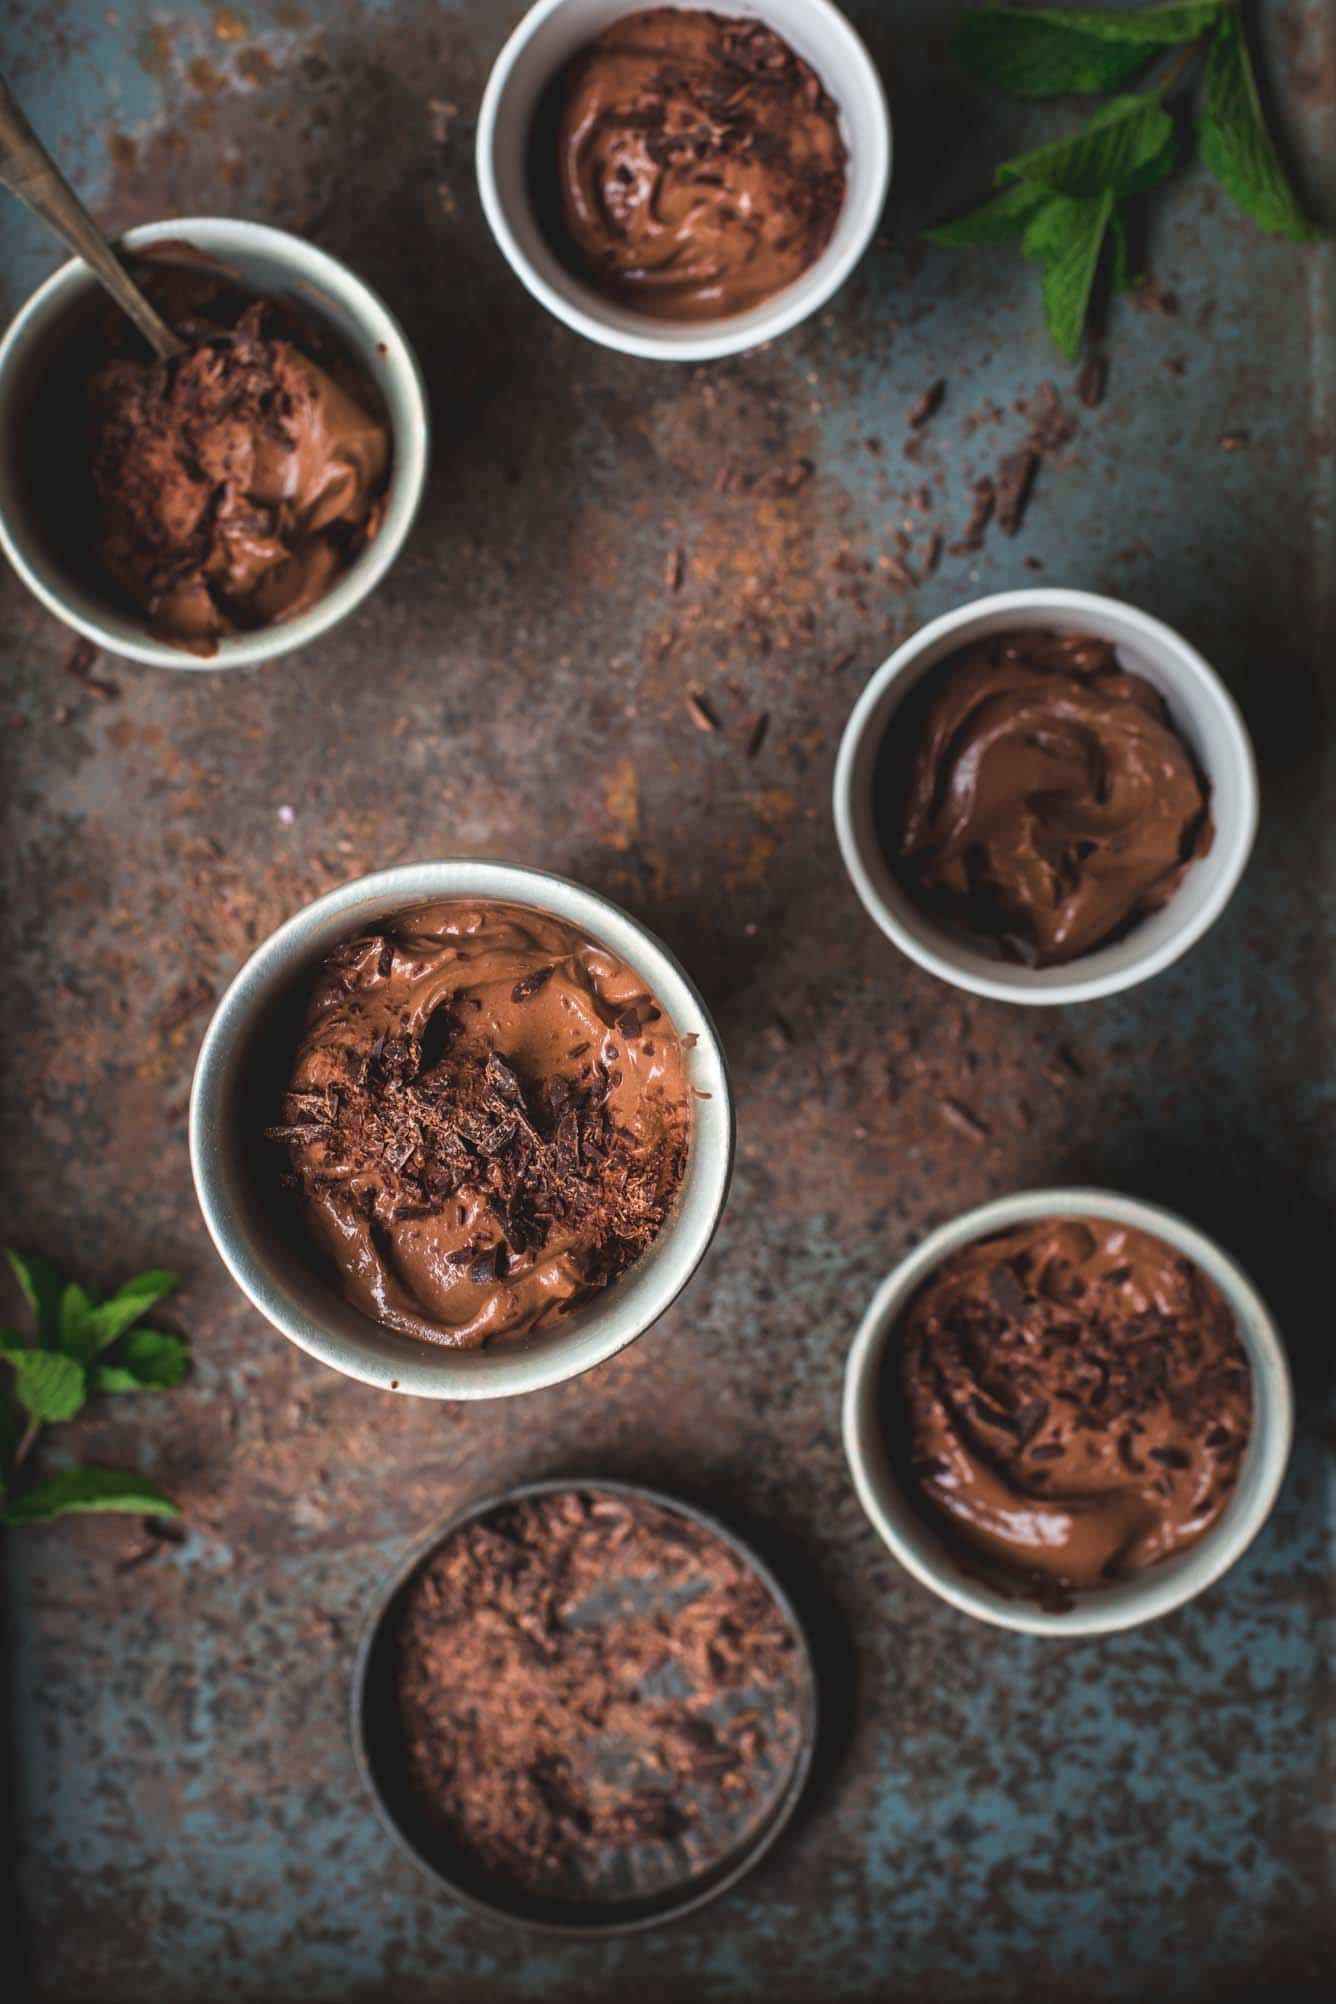 5 white ramekins full of vegan mousse sit on a vintage baking try with mint leaves scattered around. One ramekin is slightly elevated towards to the camera and is the focus point